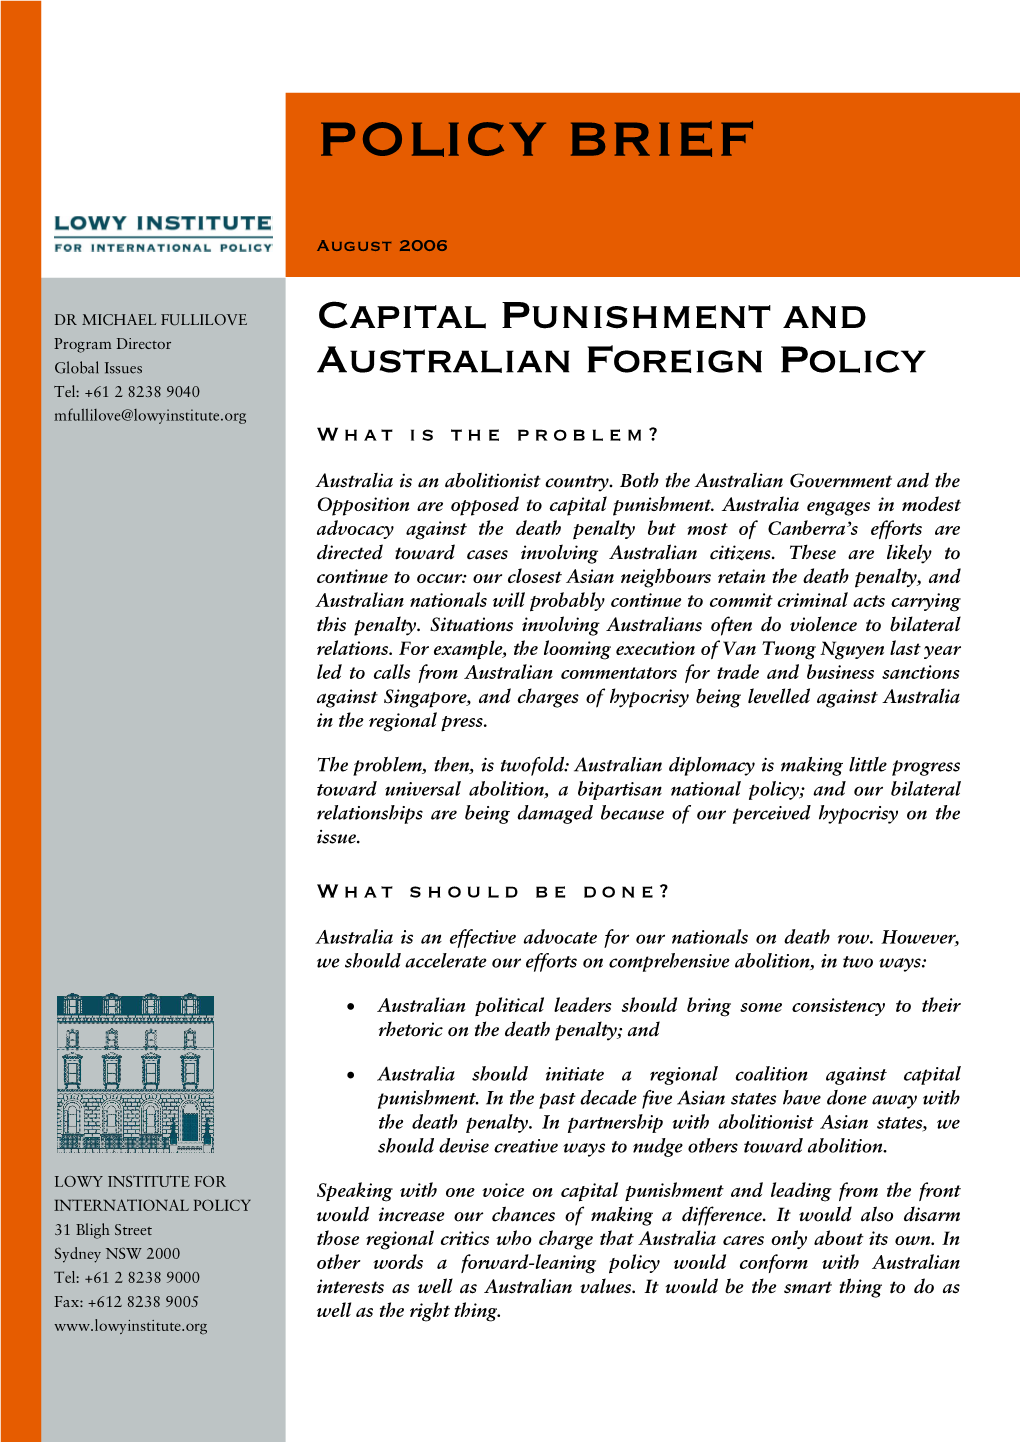 Capital Punishment and Australian Foreign Policy